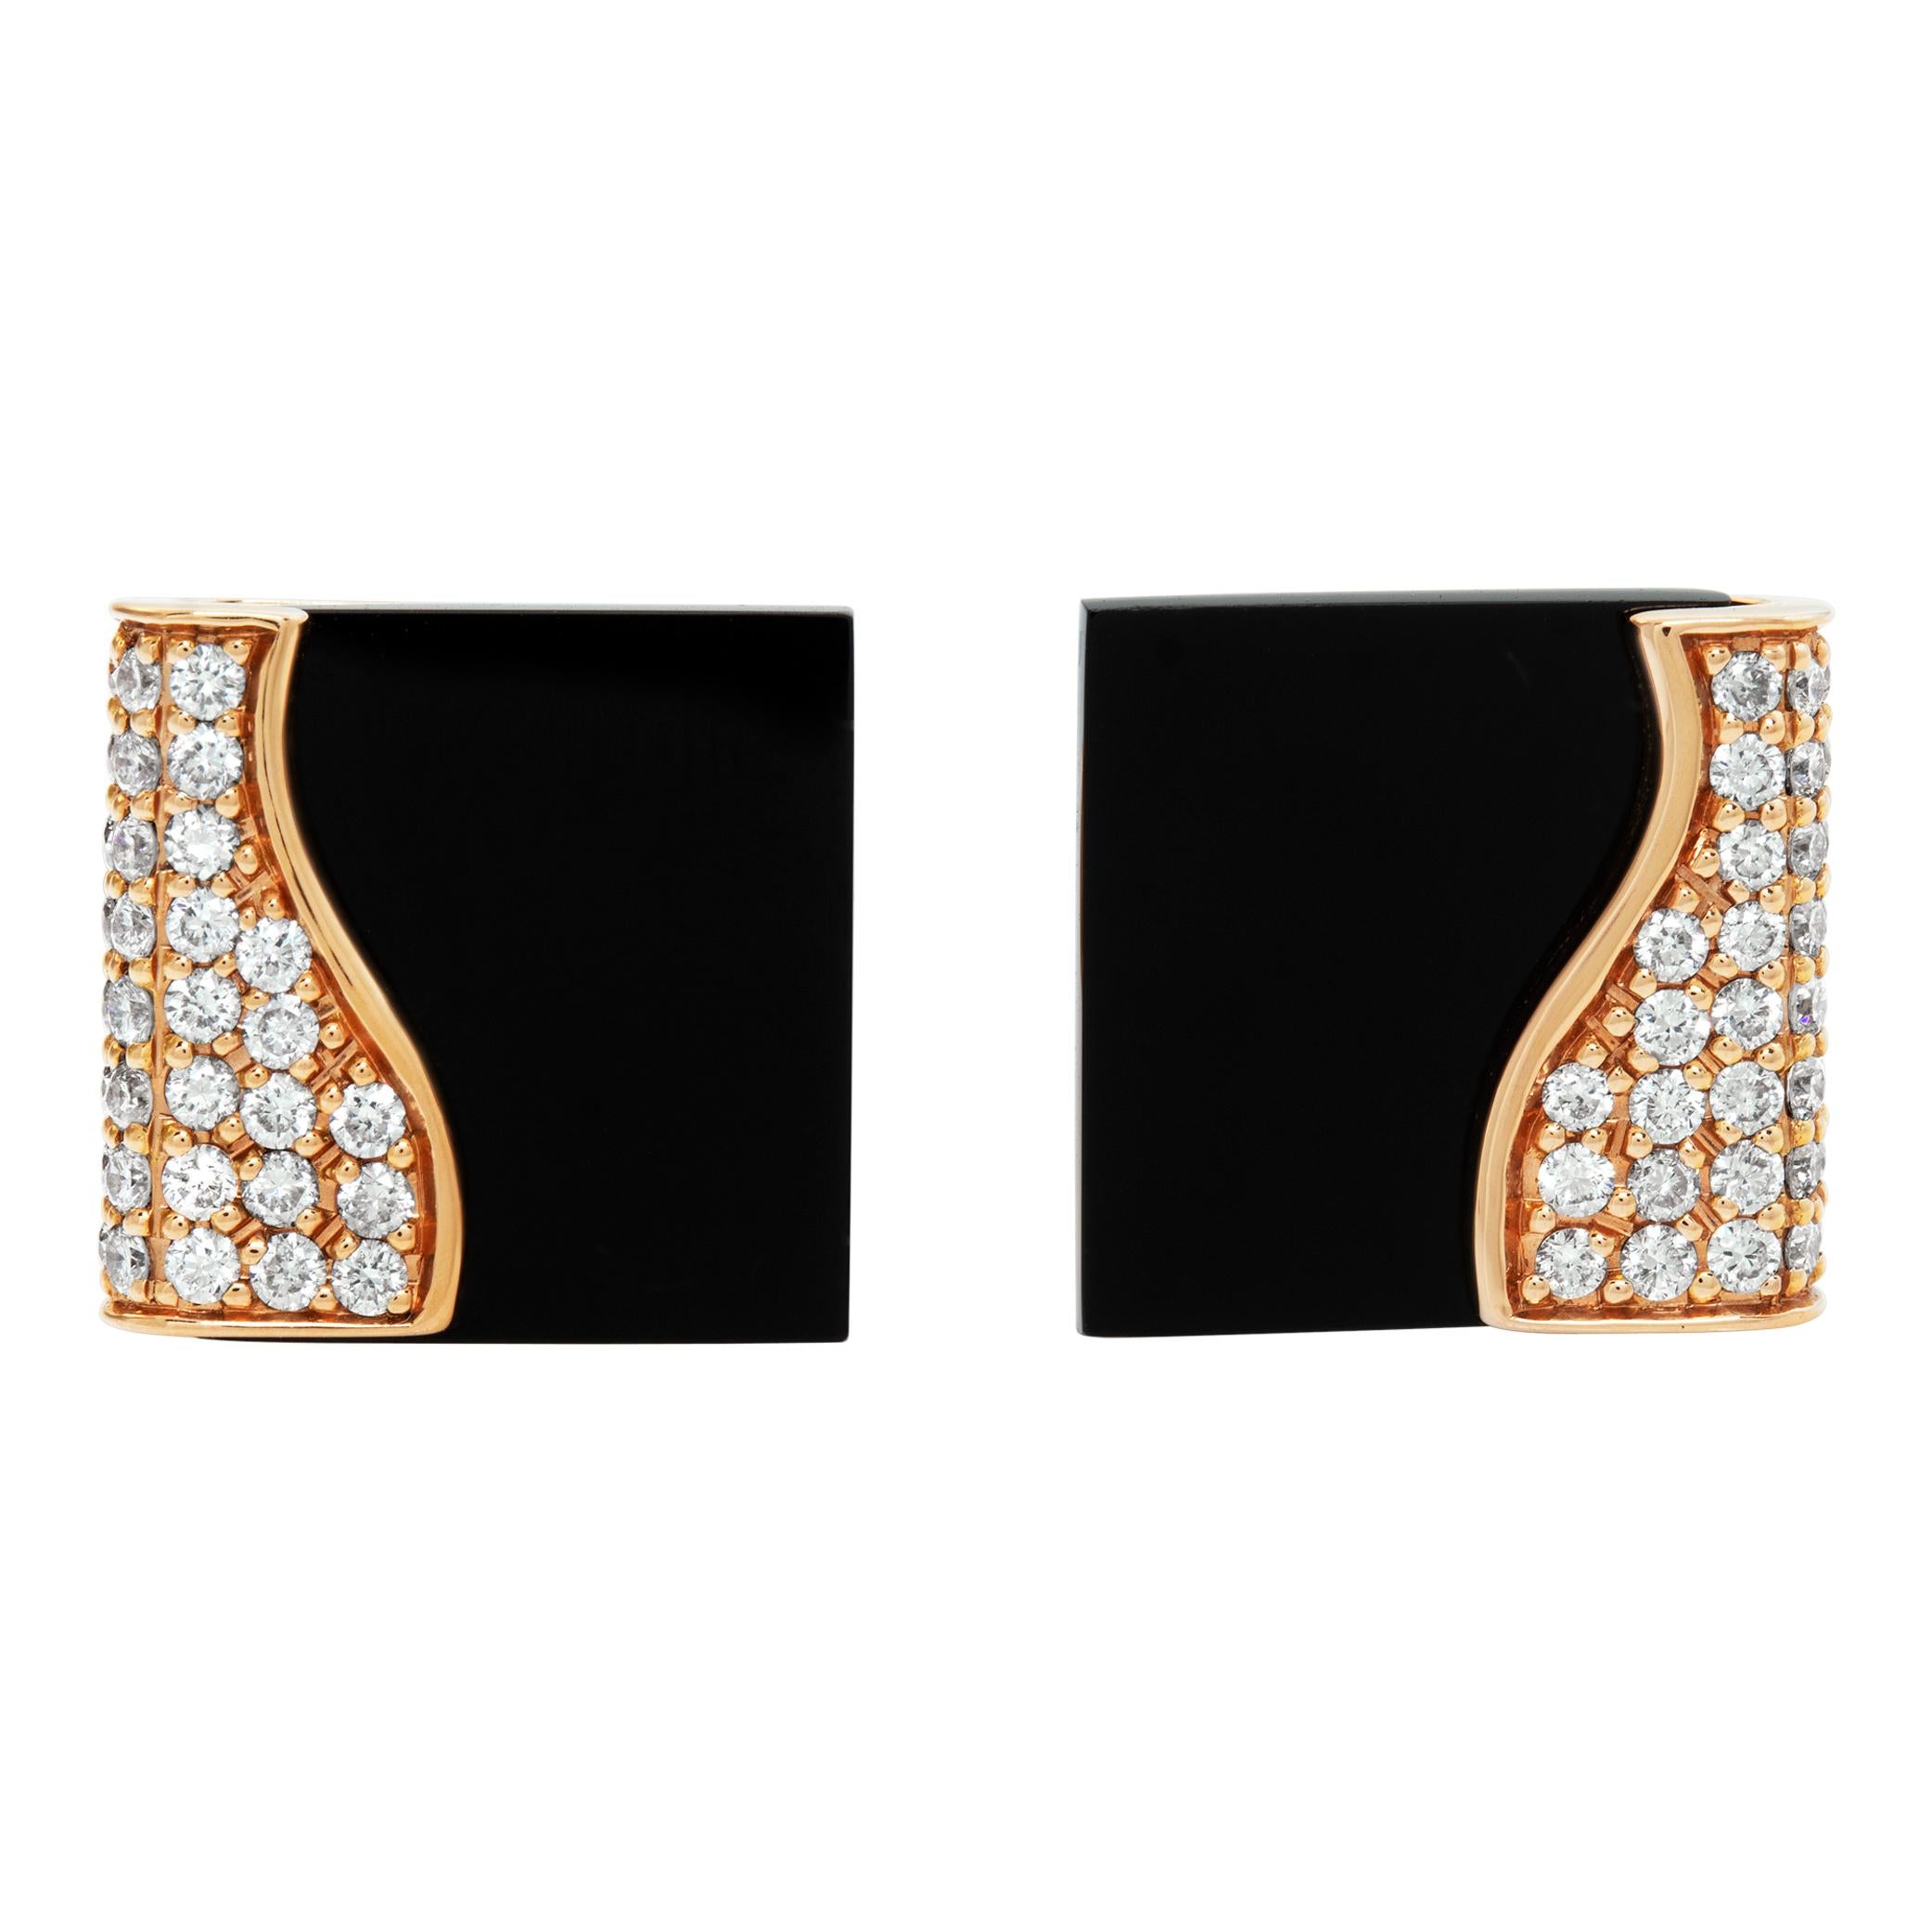 Rose gold onyx square cufflinks with pave diamonds